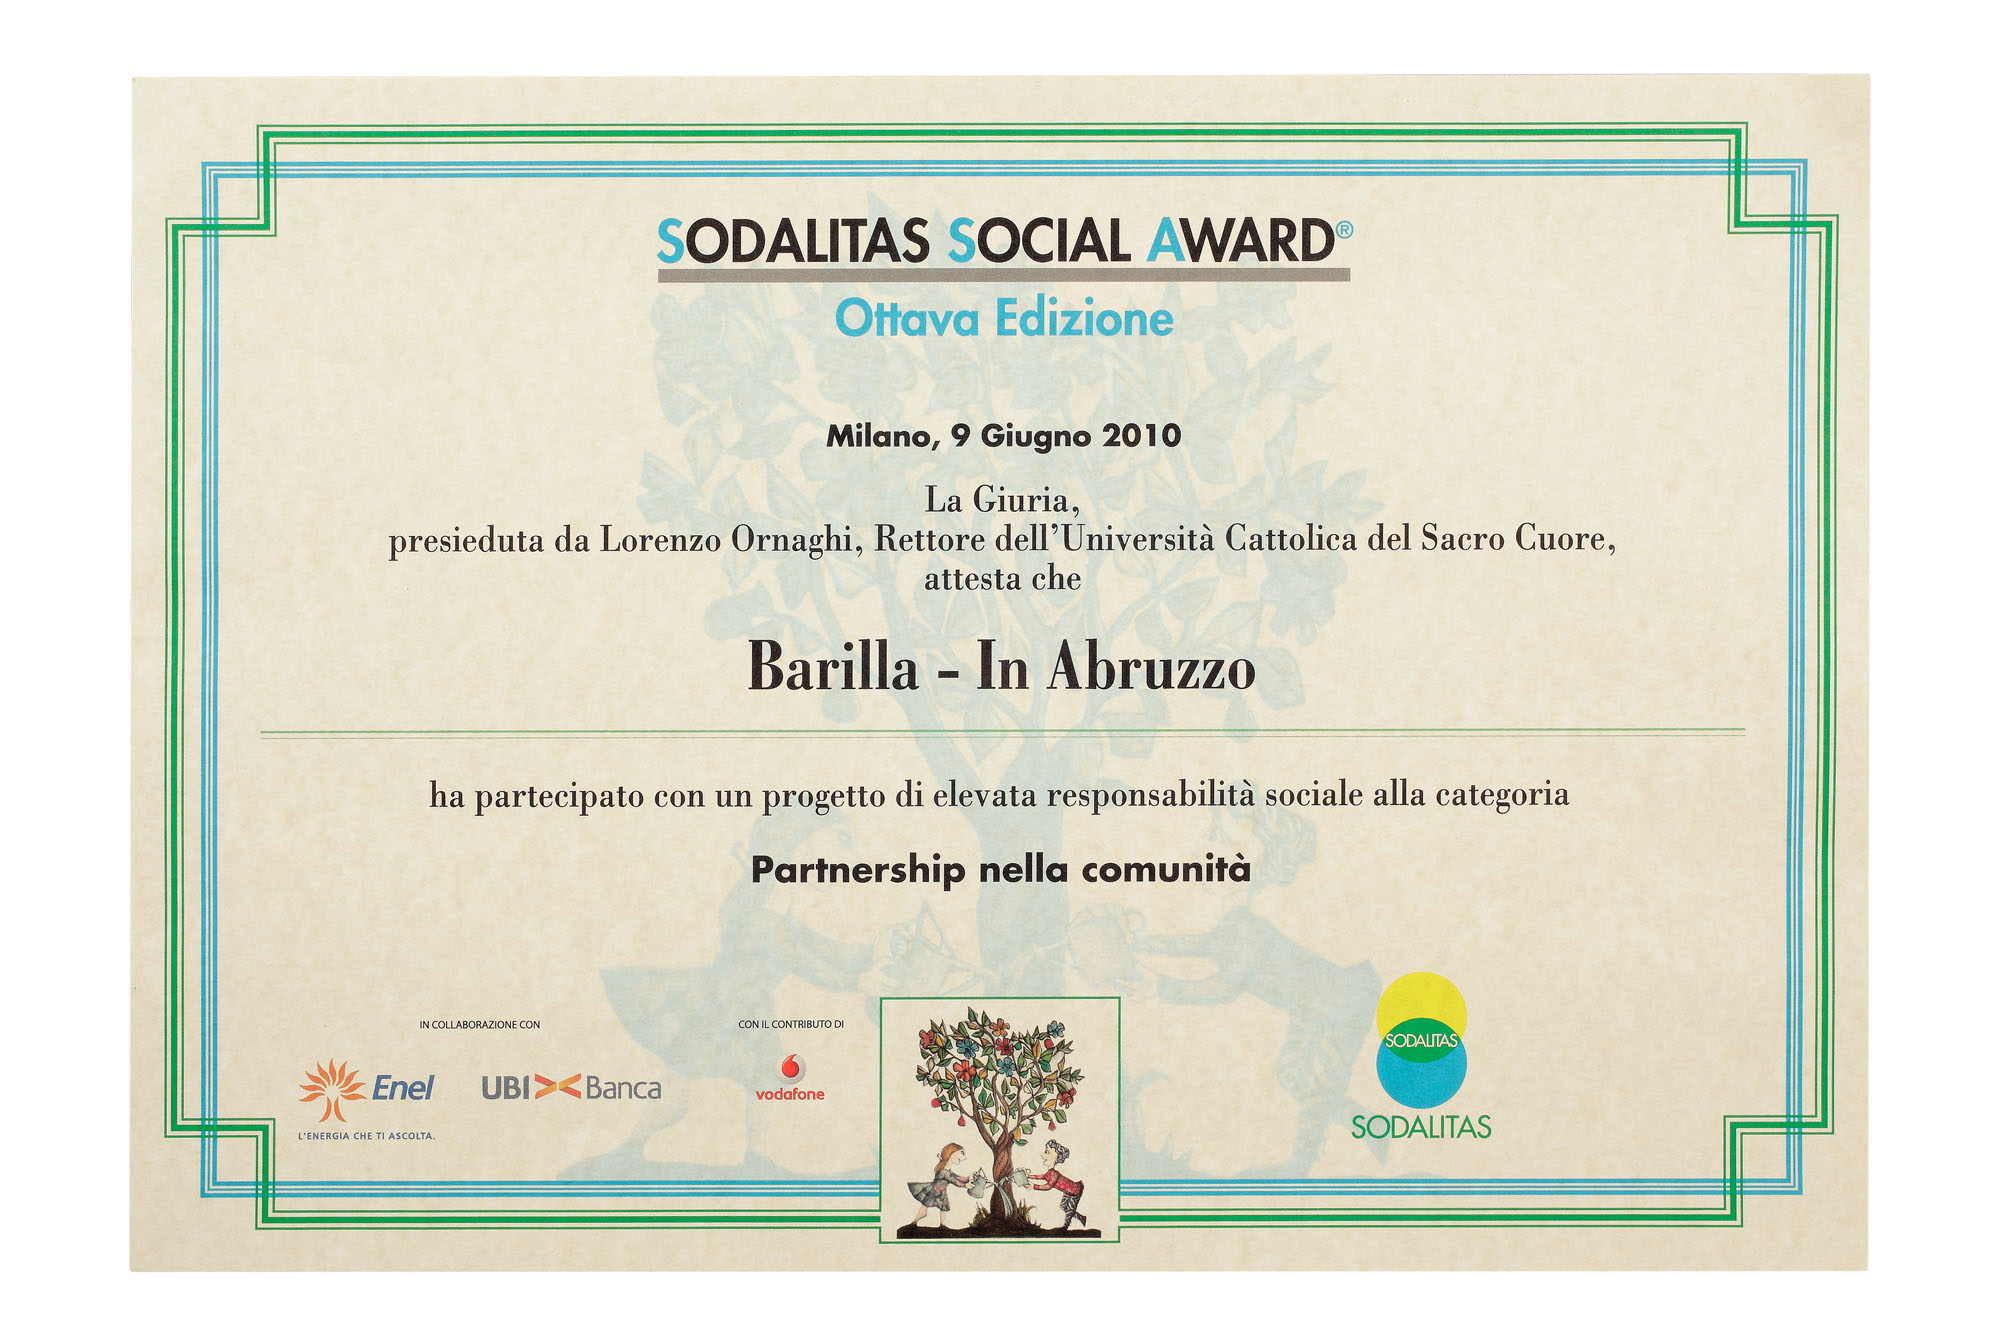 2010 - Sodalitas Social Award Diploma - 8th edition - Diploma to Barilla for its interventions in the Abruzzo region hit by the earthquake